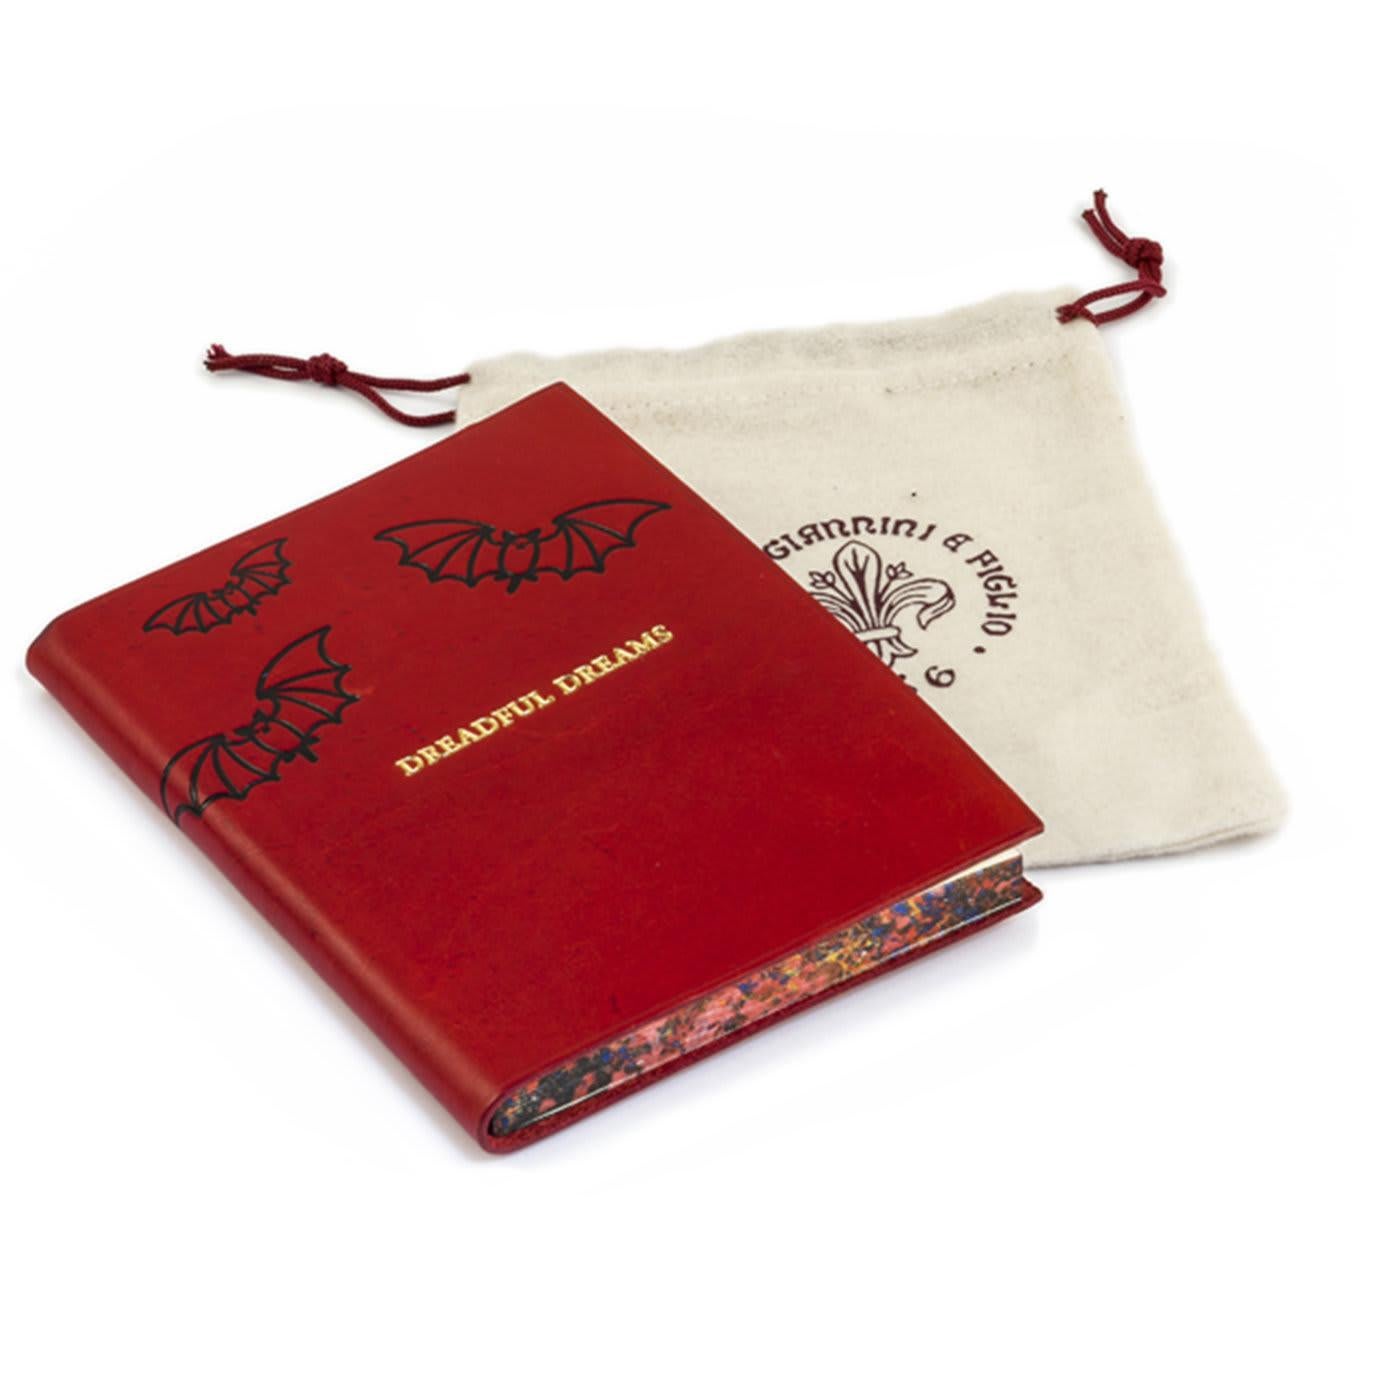 Work out the meanings of your nightmares by recording them in this fanciful dream journal. Its soft, naturally tanned, full-grain leather cover features a whimsical bat motif and the words Dreadful Dreams in gold. Contains blank, acid-free,